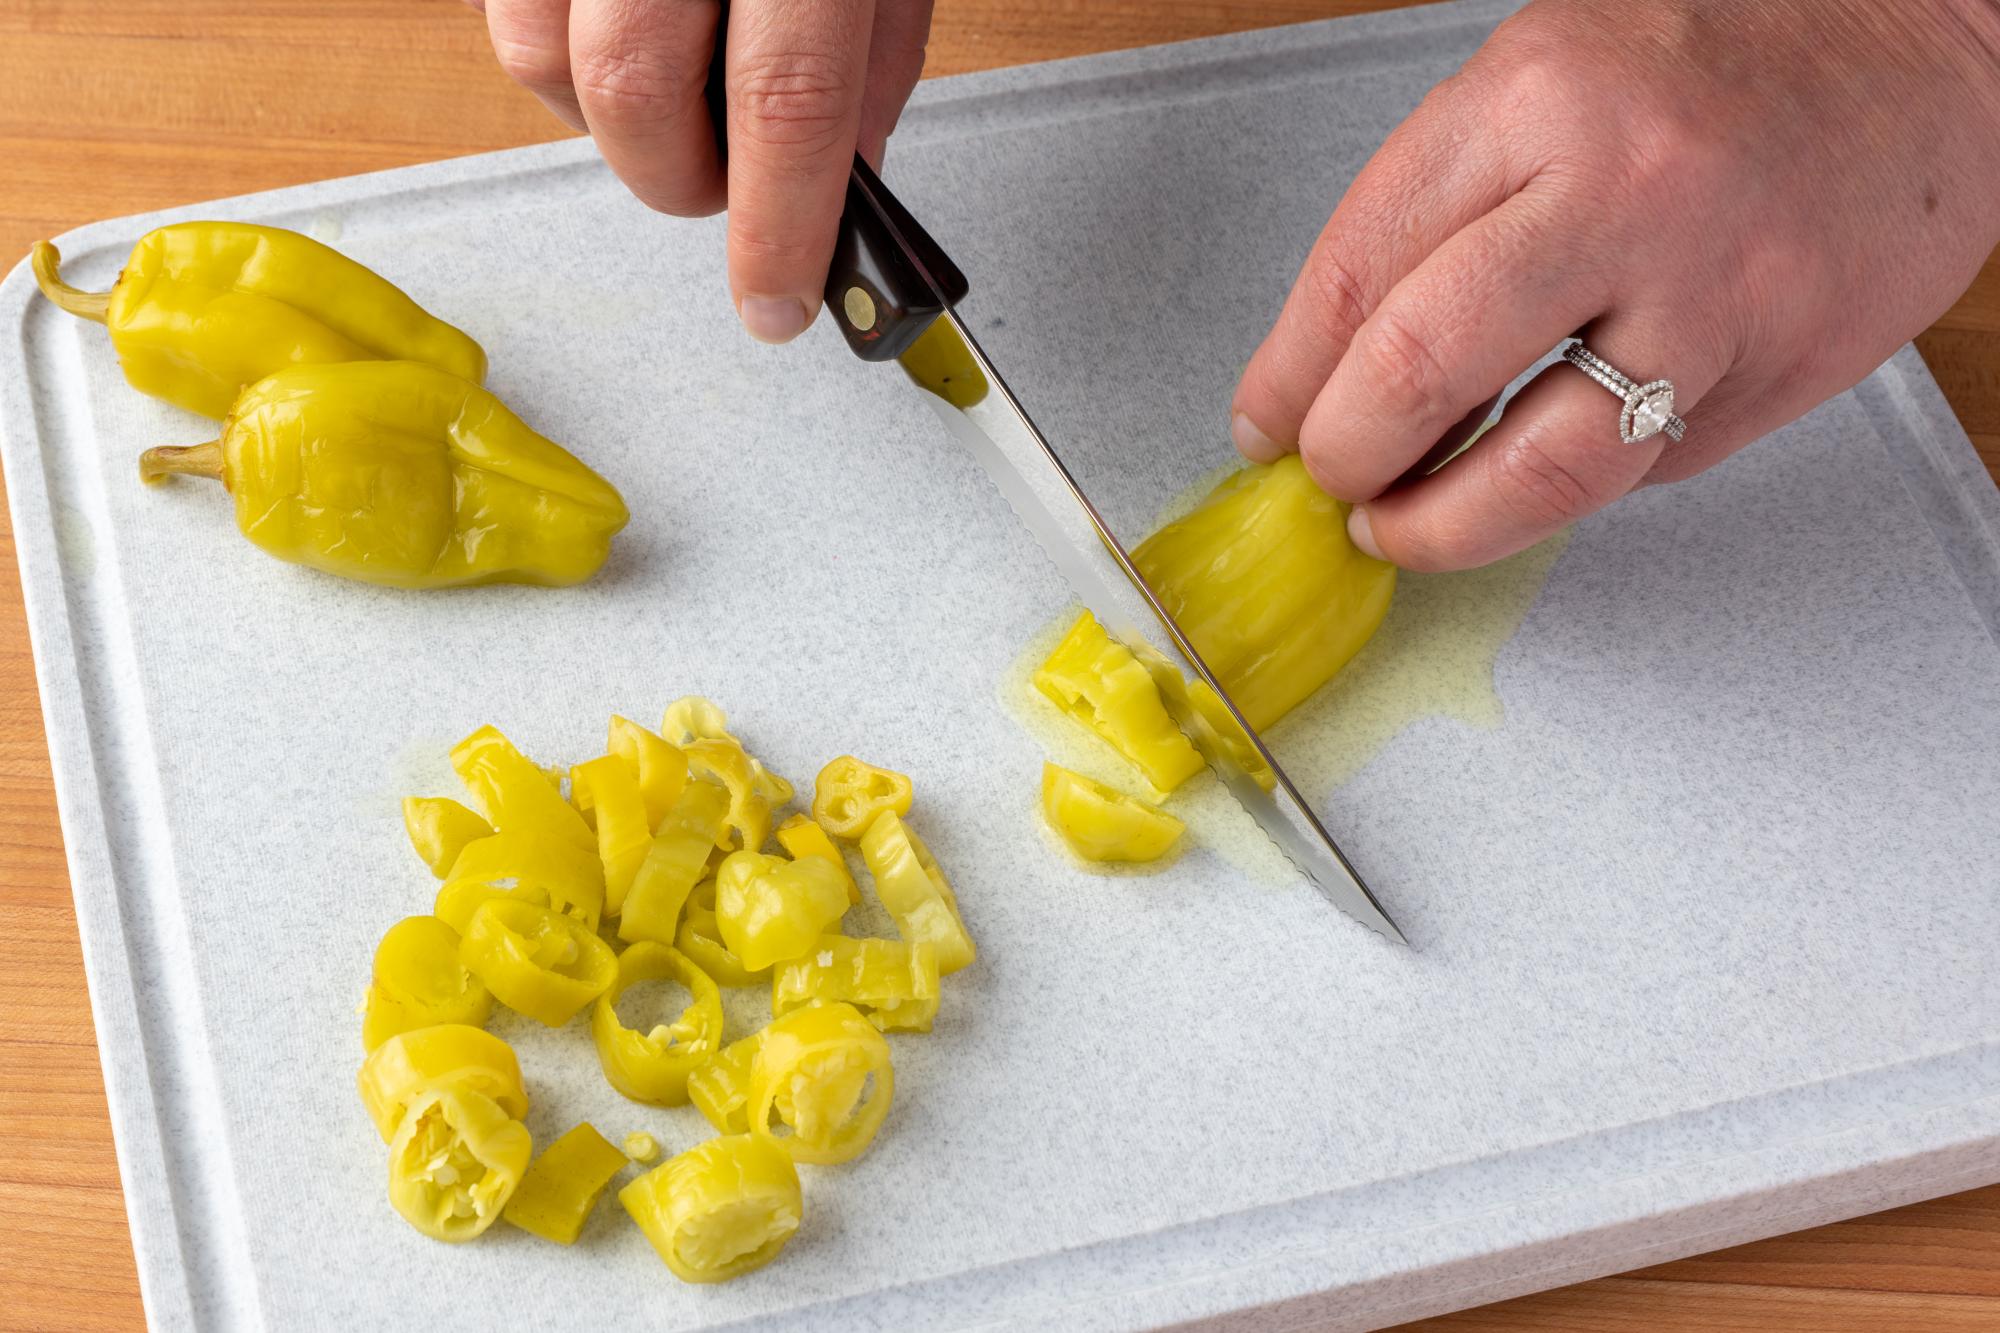 Trimmer being used to slice the pepperoncini's.